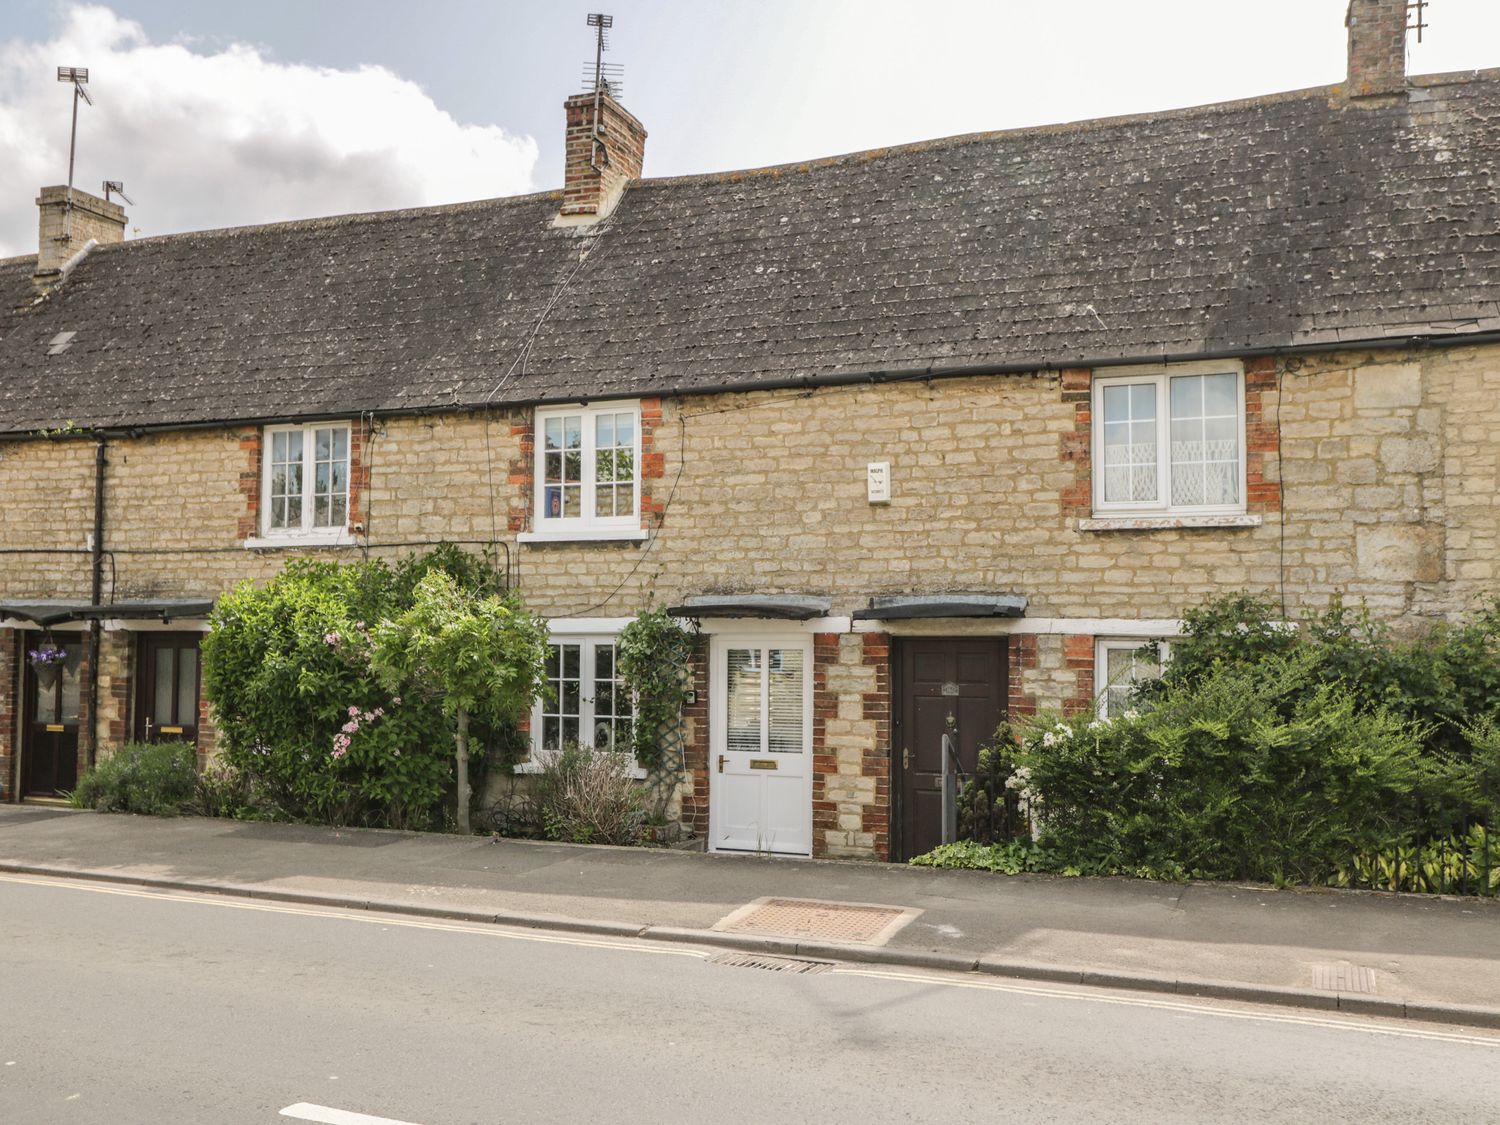 Wharf Cottage - Cotswolds - 1127183 - photo 1